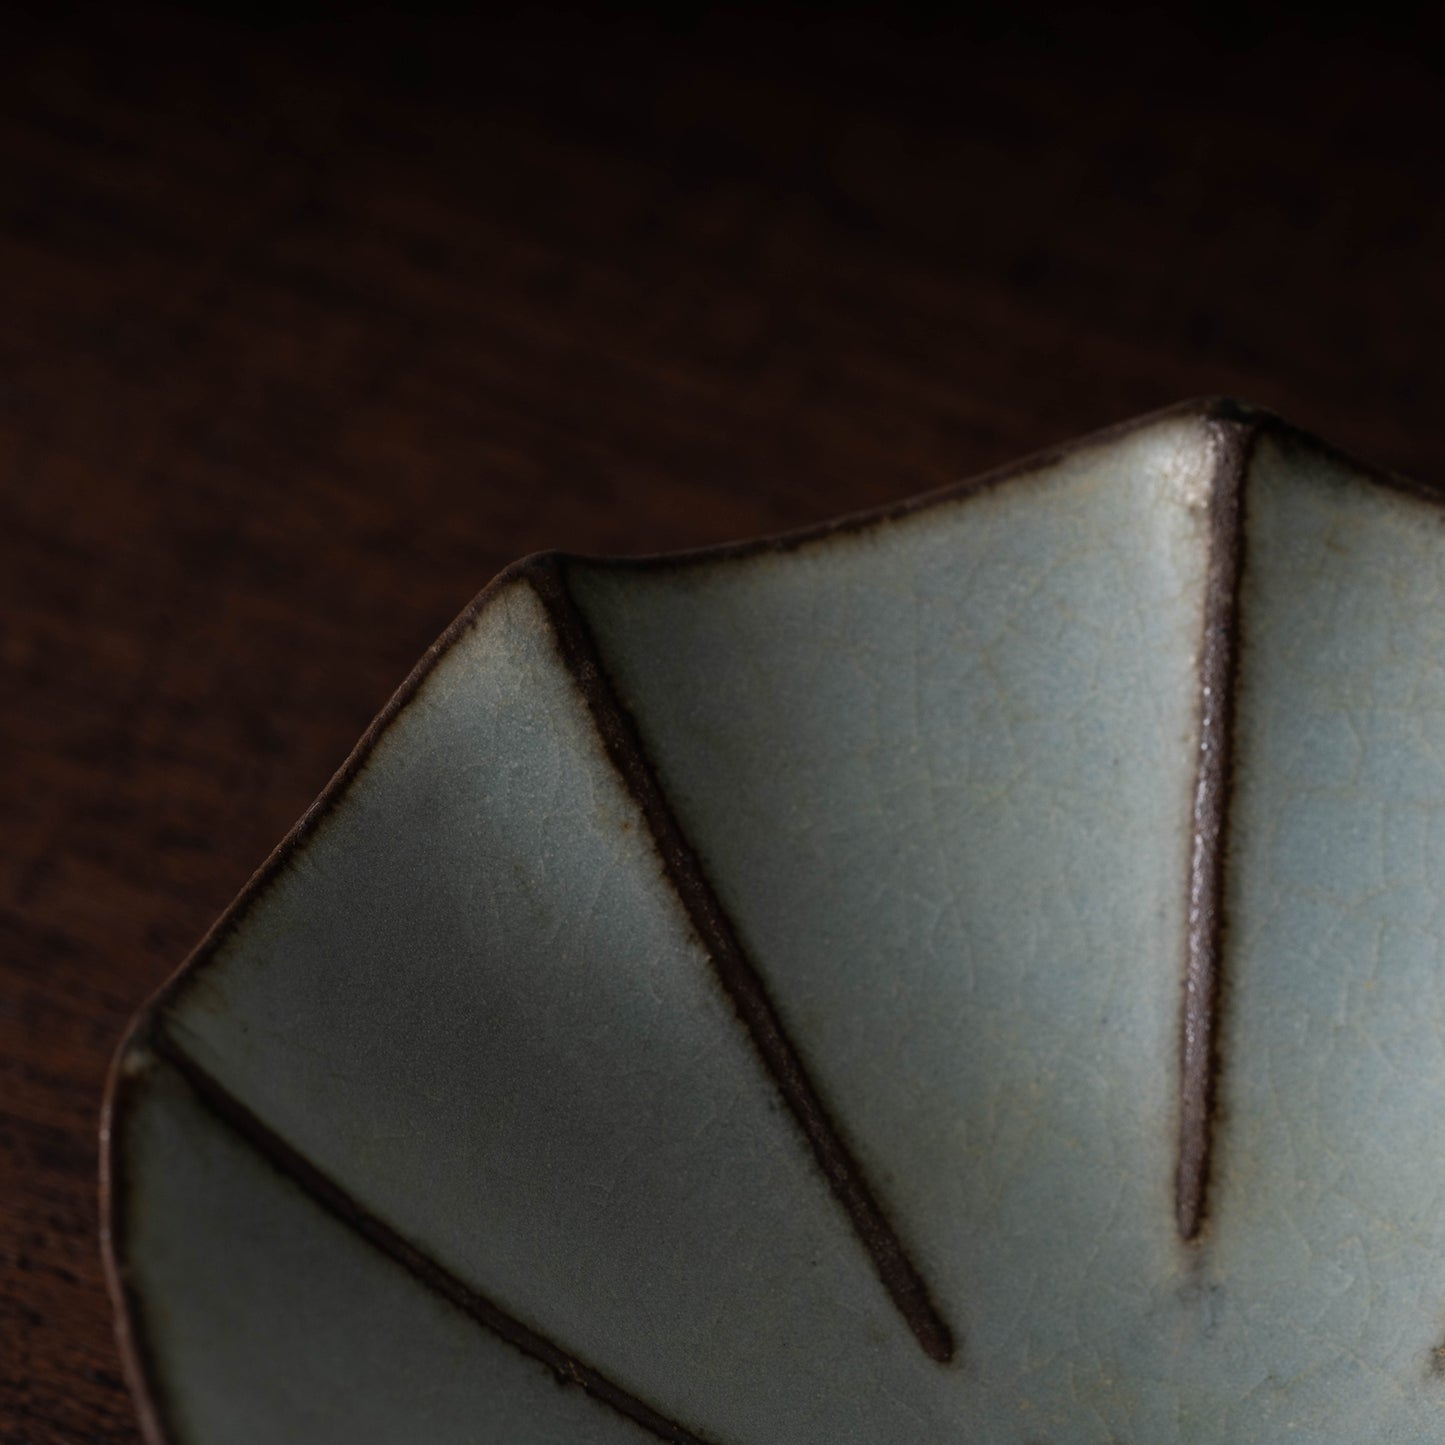 Southern Song Dynasty Guan ware Celadon Tea bowl with Flower Design